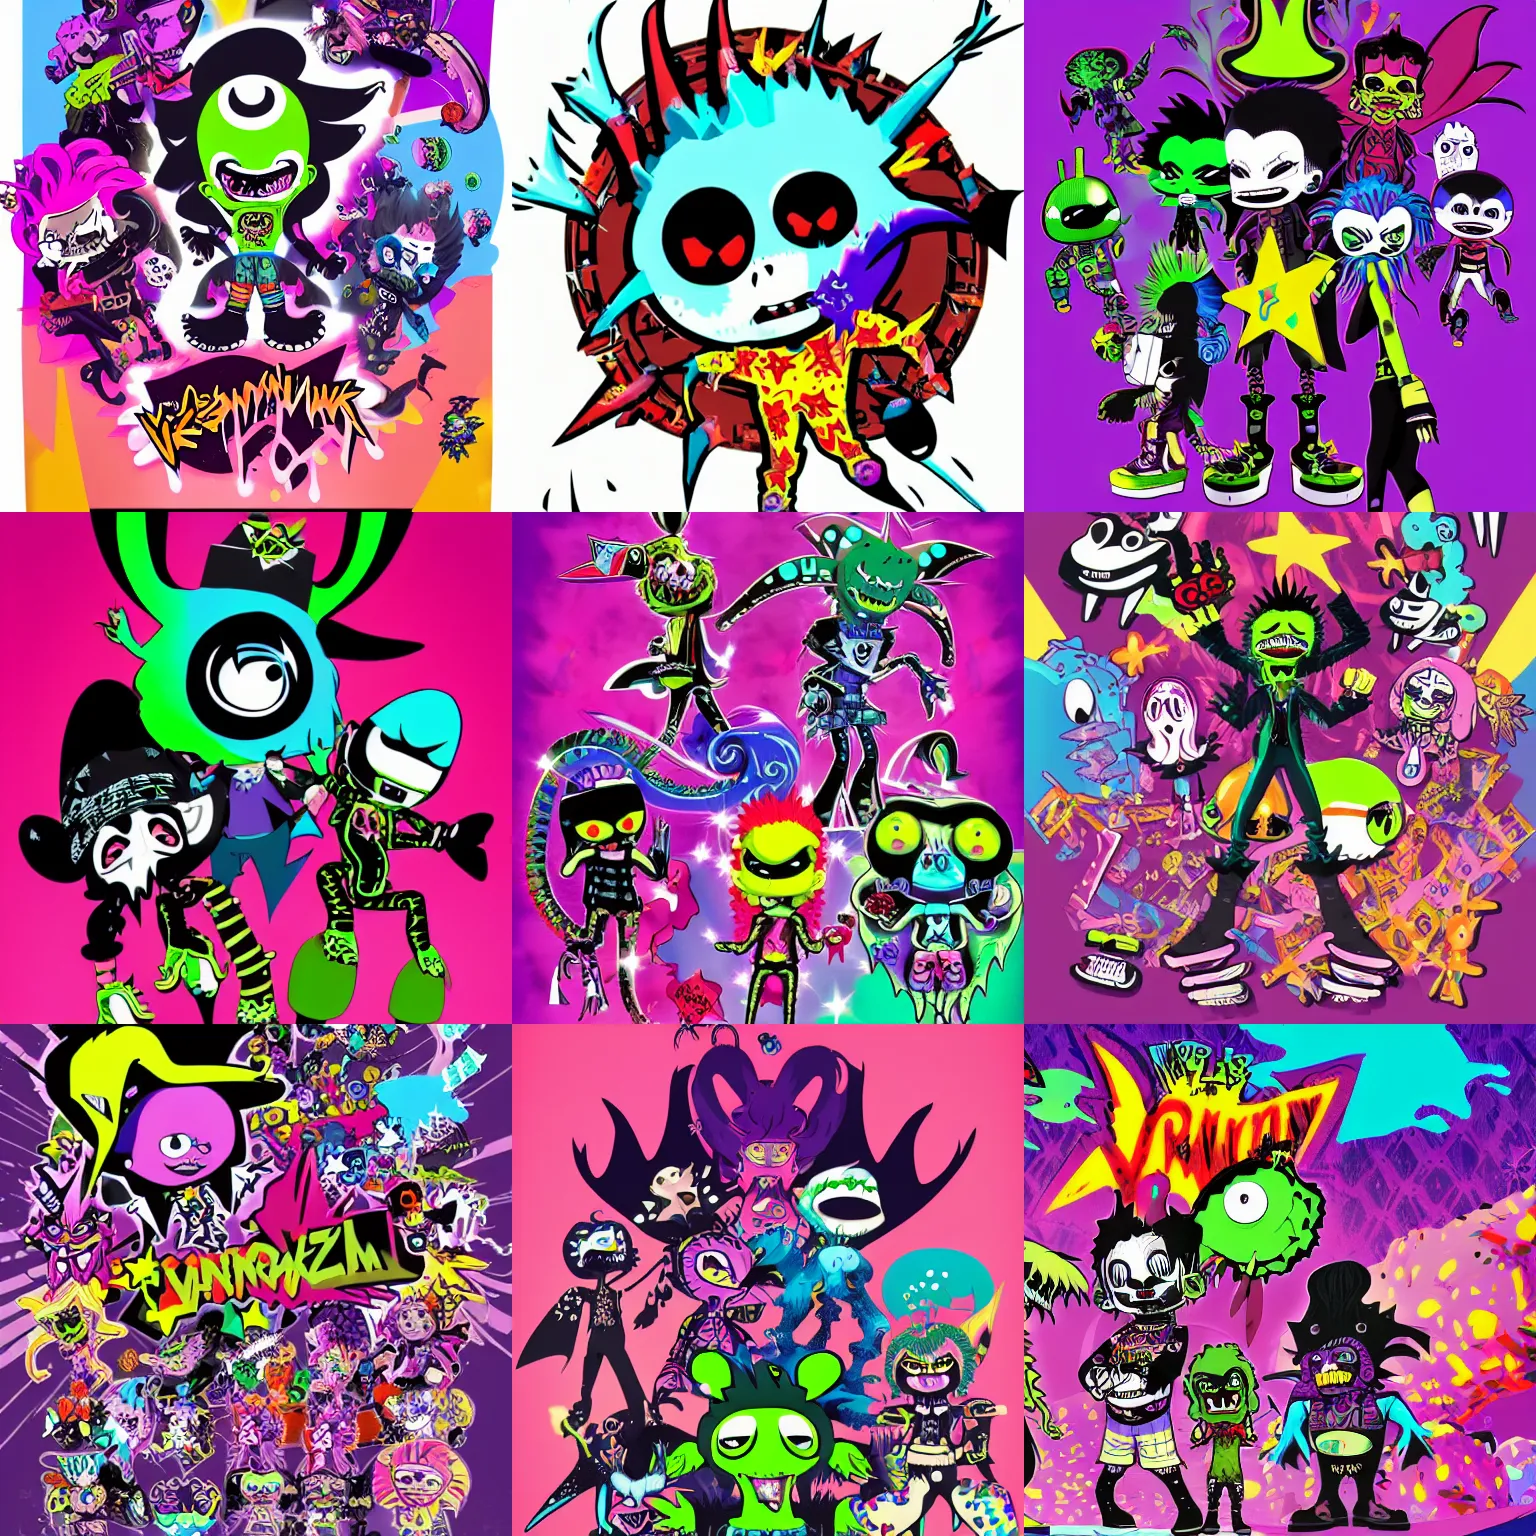 Prompt: lisa frank punk rocker vampiric electrifying rockstar vampire squid concept character designs of various shapes and sizes by genndy tartakovsky and rad sechrist and Jamie Hewlett from gorrilaz and tim shafer and okami the videogame by clover studio for the new splatoon game by nintendo